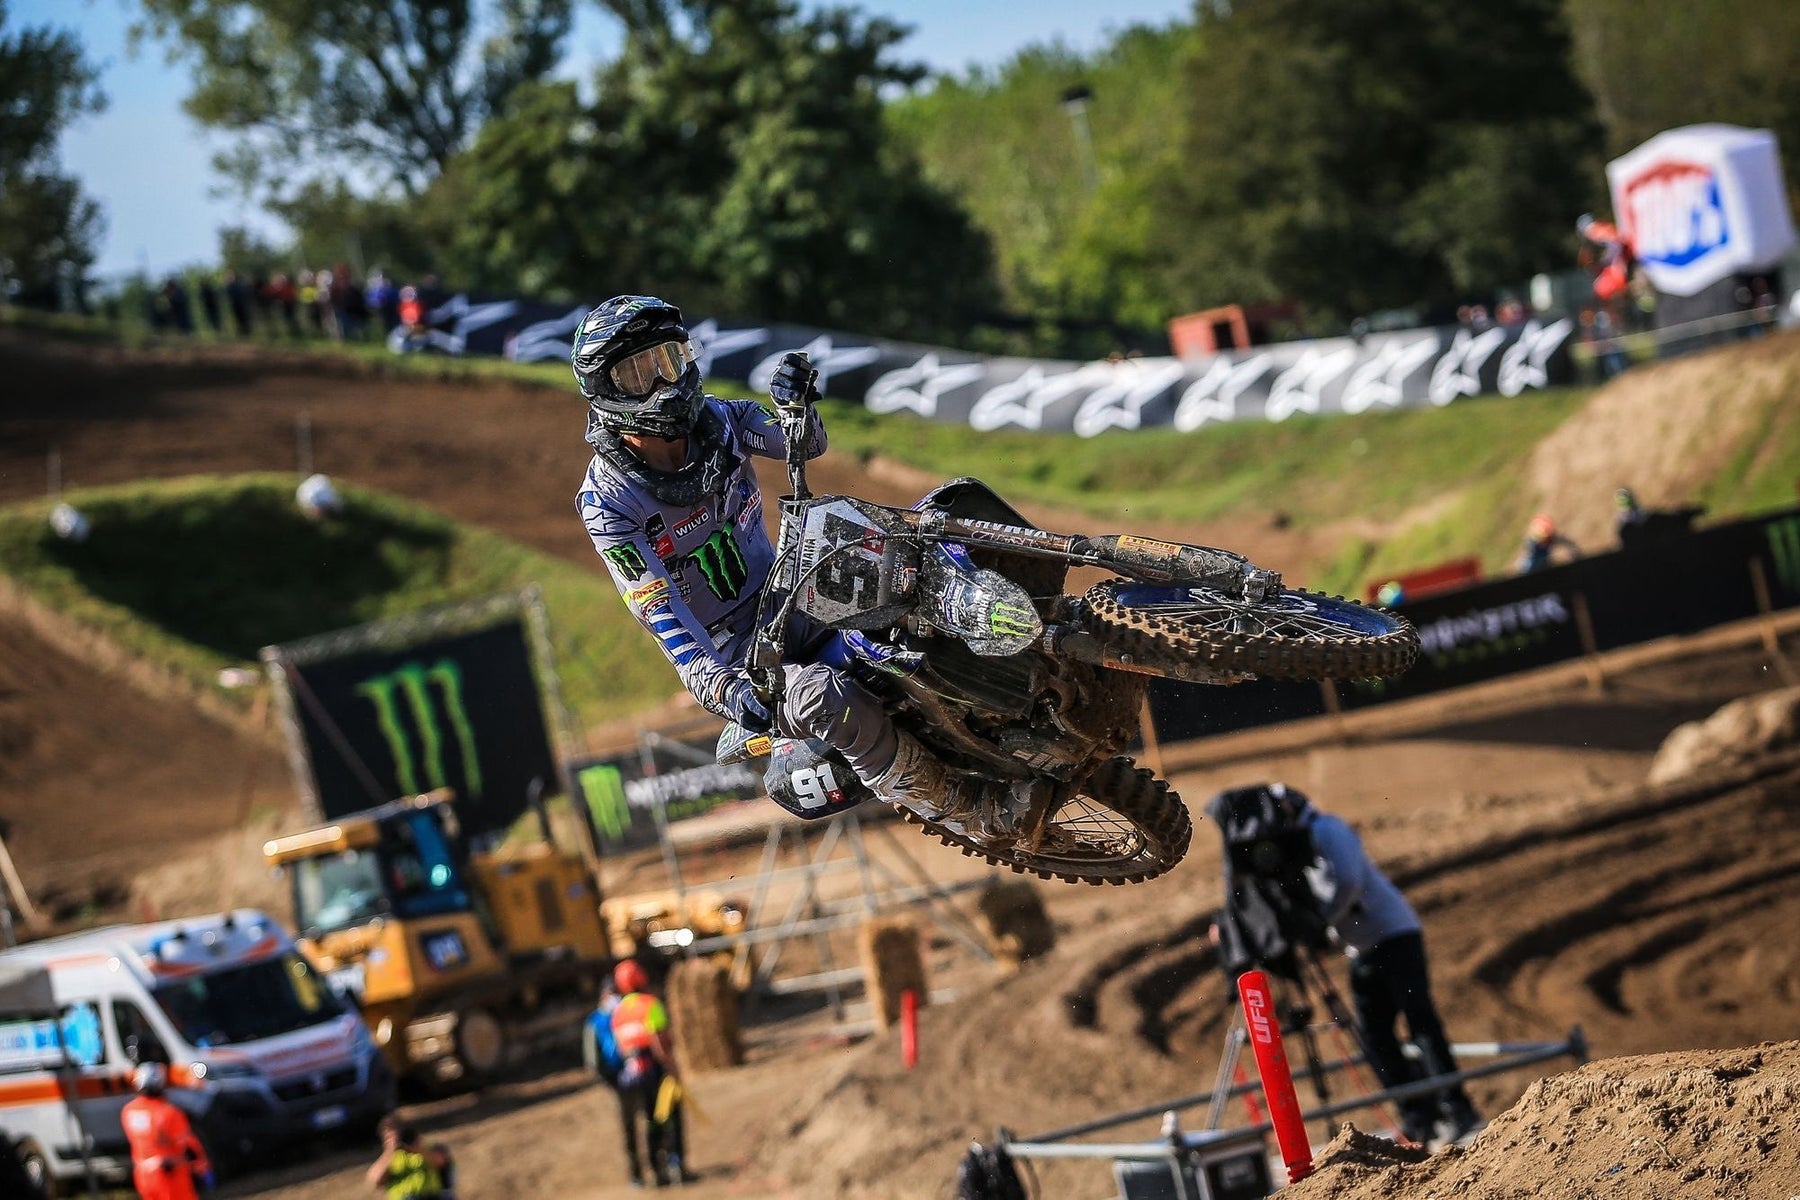 ALPINESTARS ONE, TWO AS JEREMY SEEWER TAKES FIRST OVERALL MXGP WIN AT MXGP OF LOMBARDIA, ITALY